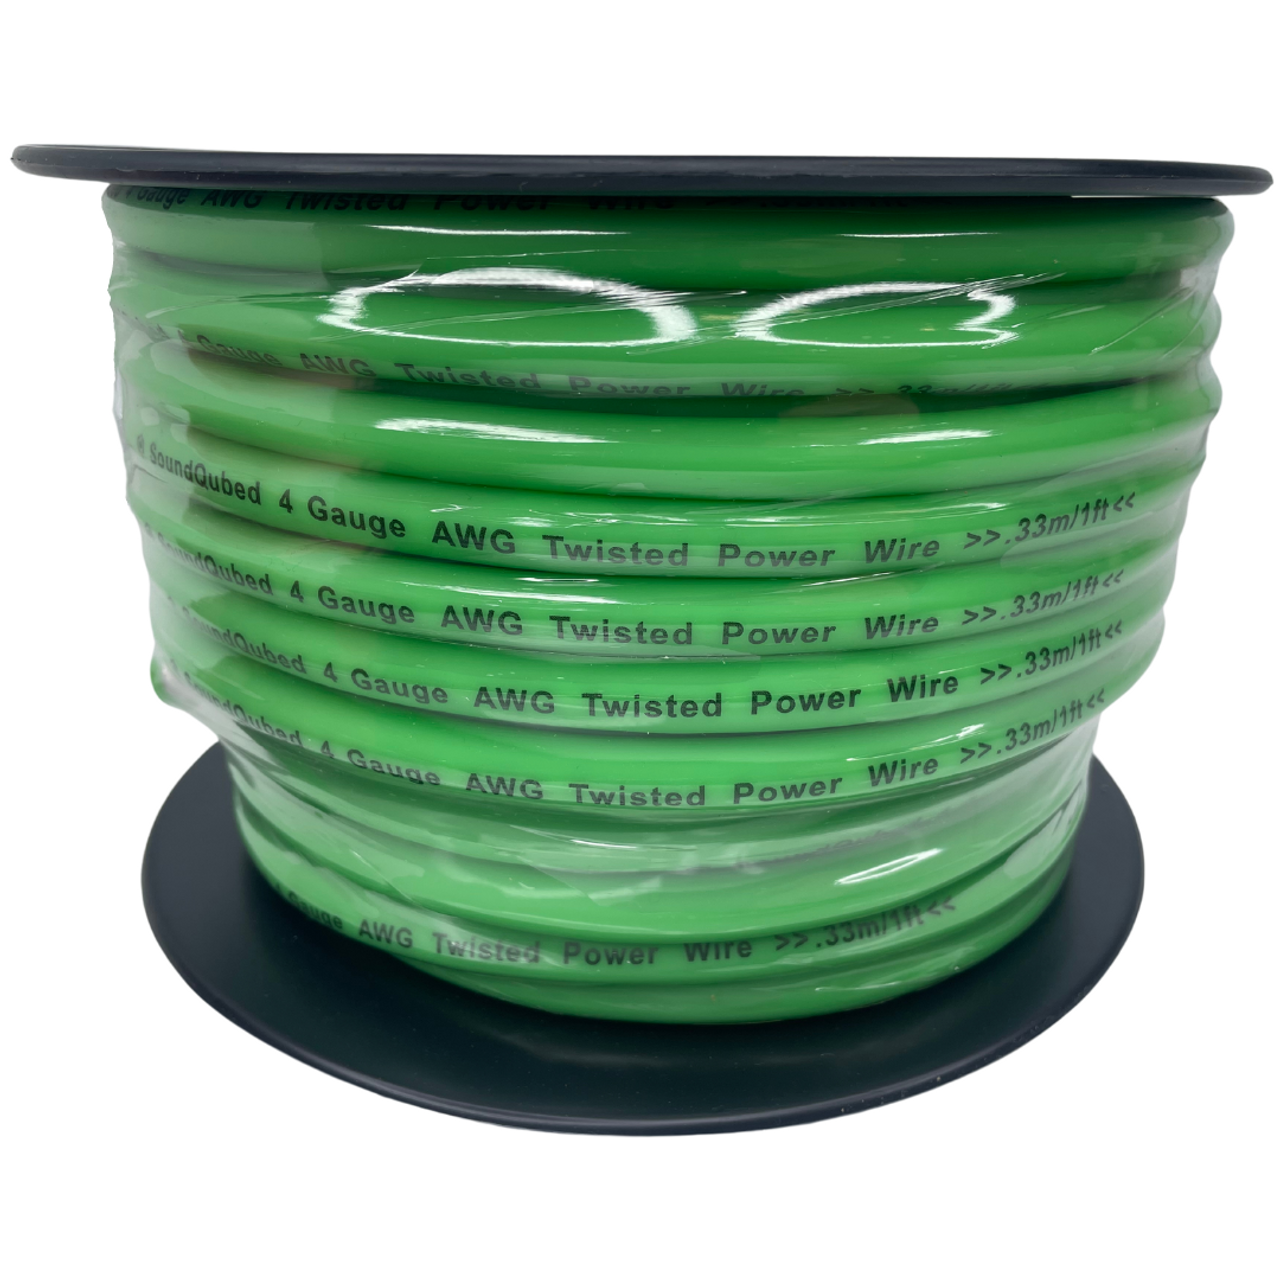 SOUNDQUBED 4ga Power and Ground Wire (100ft Spool)